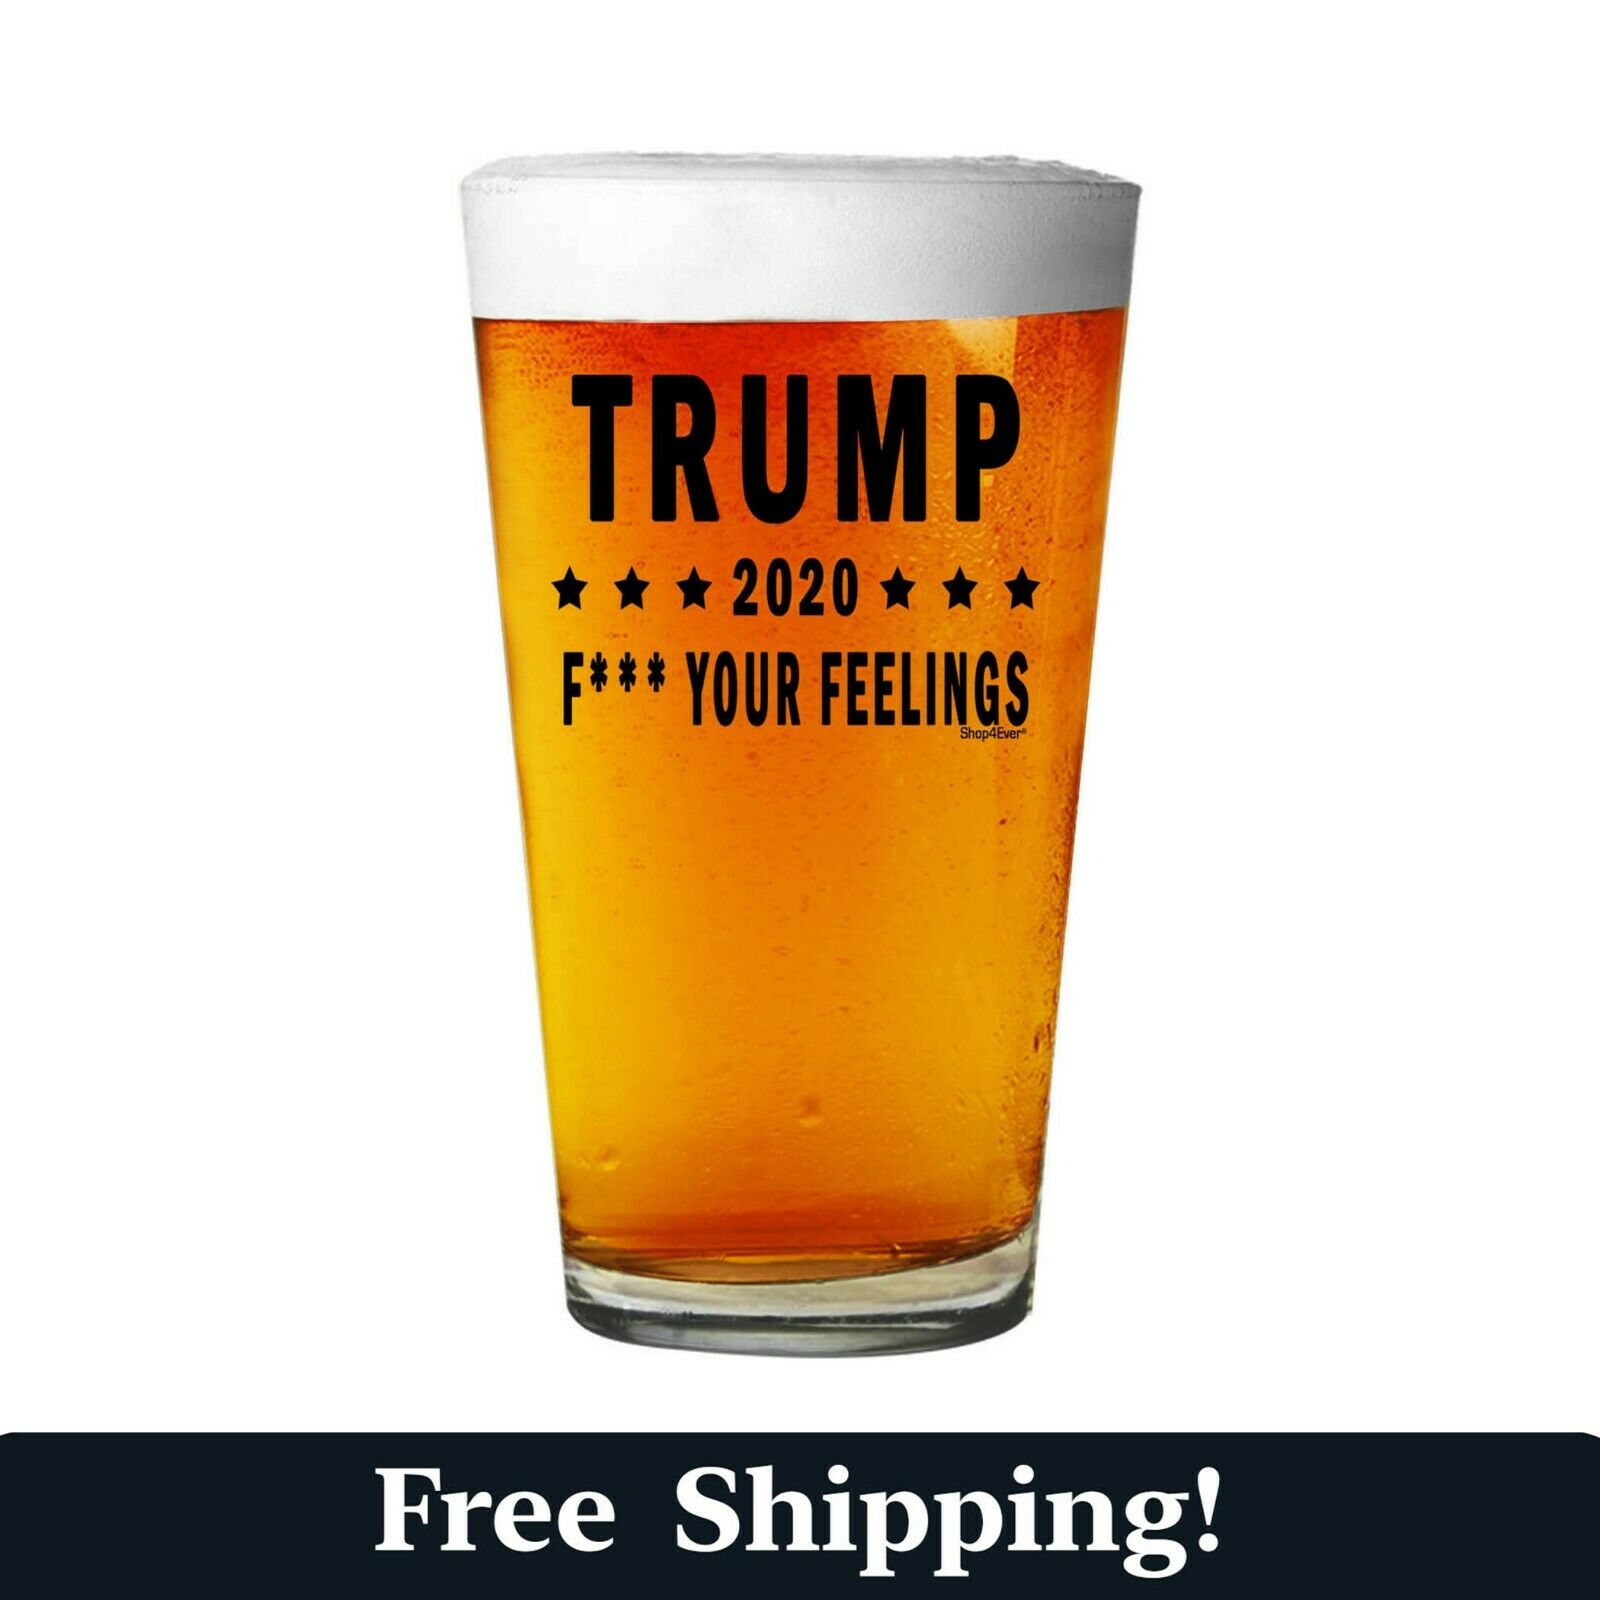 Trump 2020 F Your Feelings Beer Pint Glass Cup Re-Elect Donald Trump MAGA 16 oz